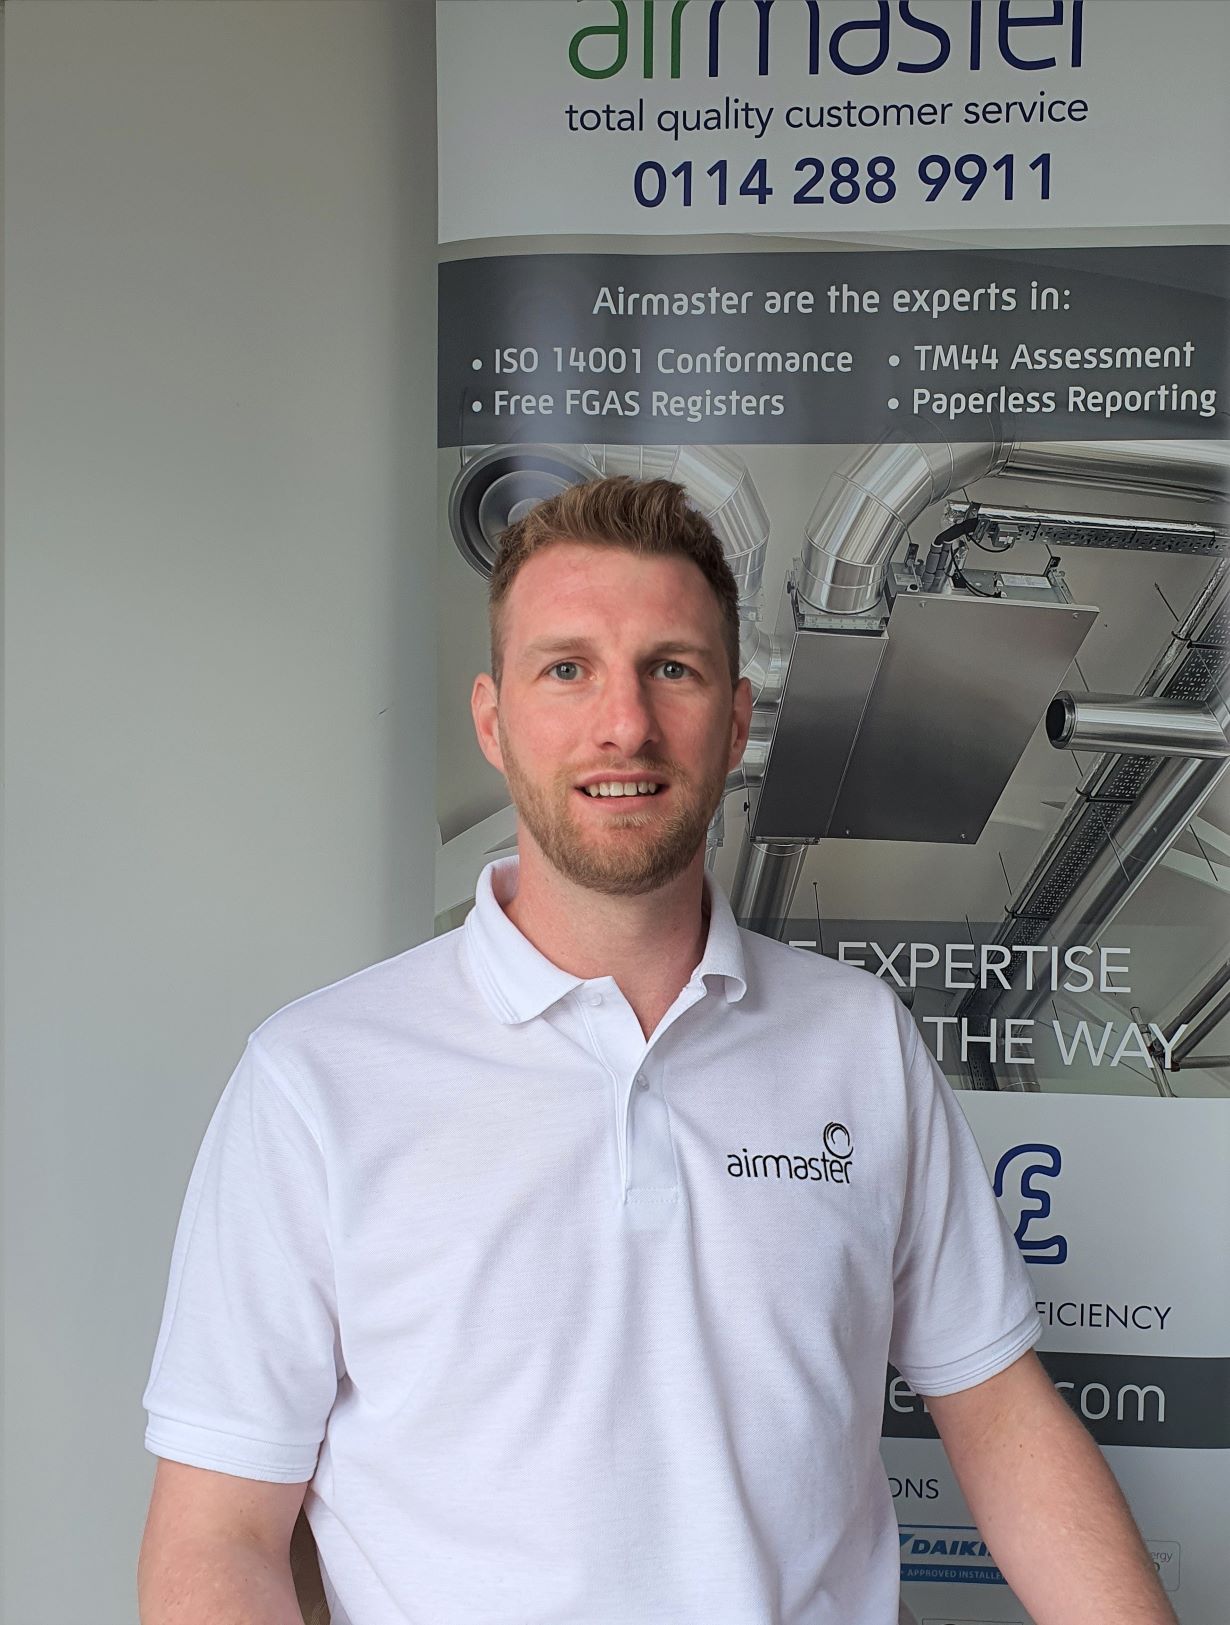 Airmaster appoints new senior contracts manager in their maintenance department